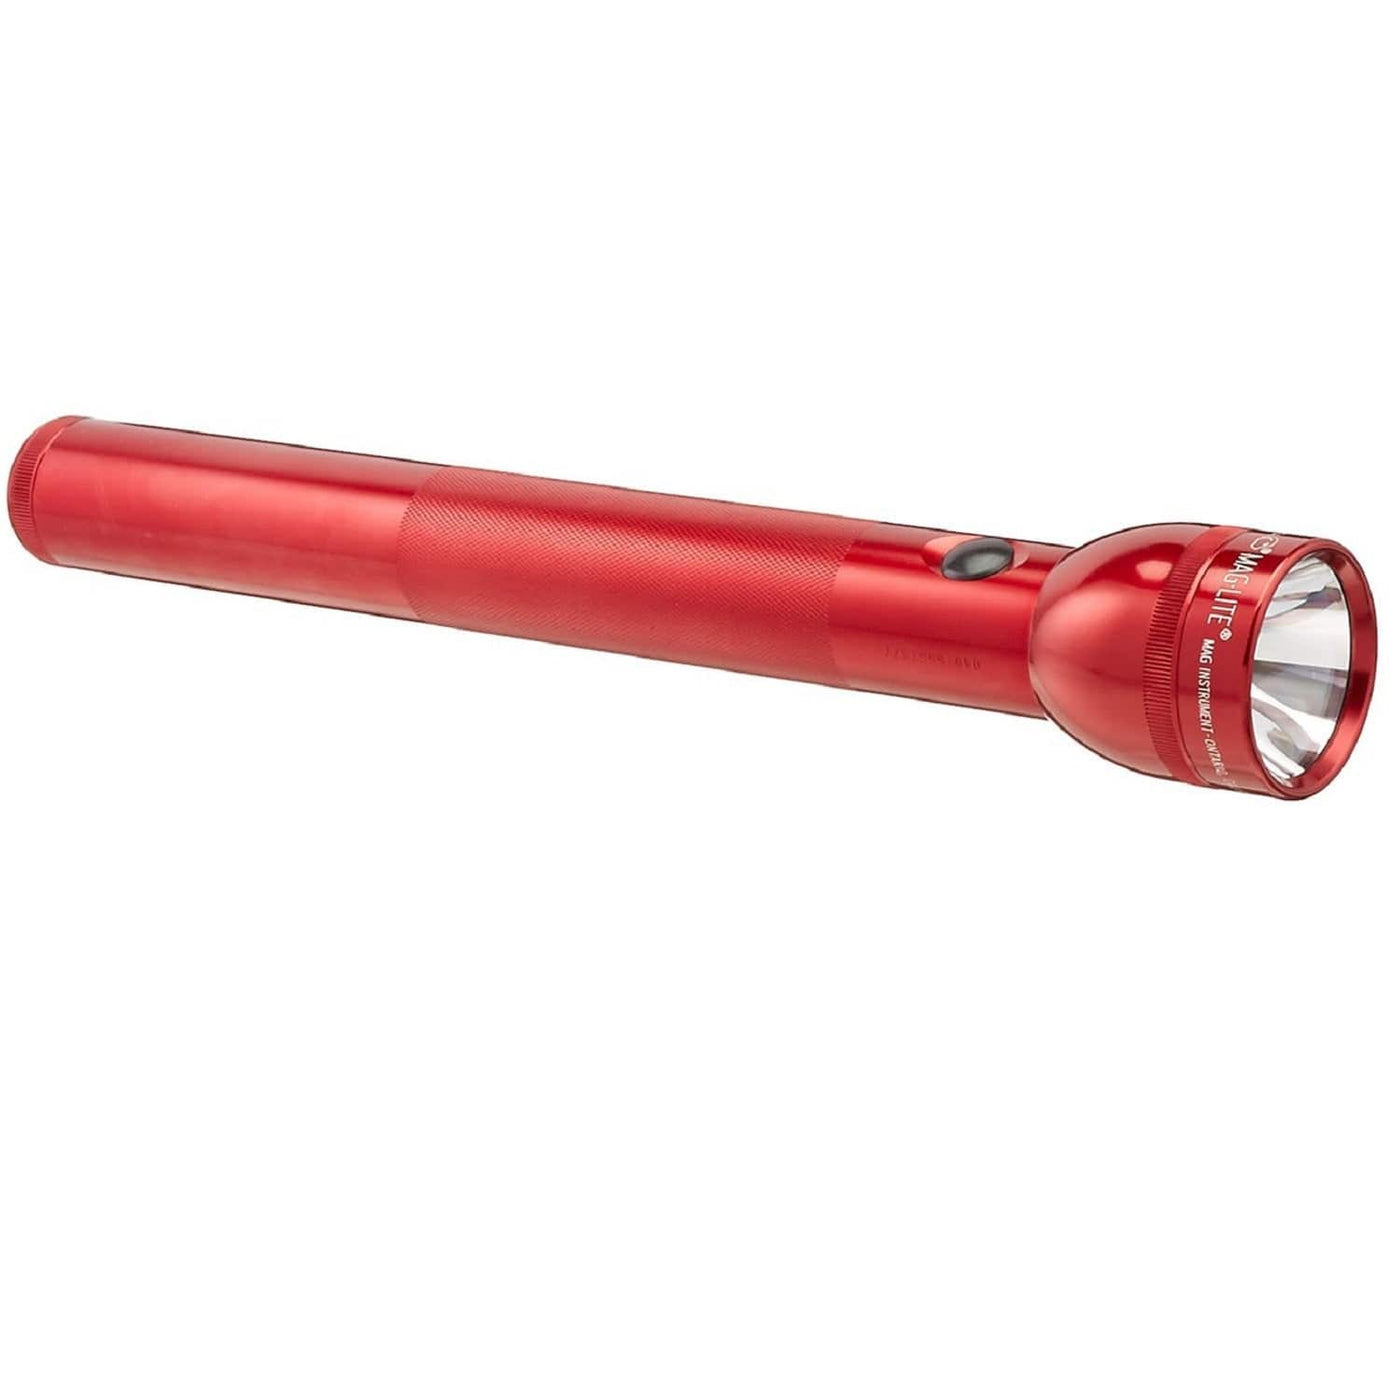 Maglite Maglite Heavy-Duty Incandescent 3-Cell D Flashlight Black Red / 4 Lights